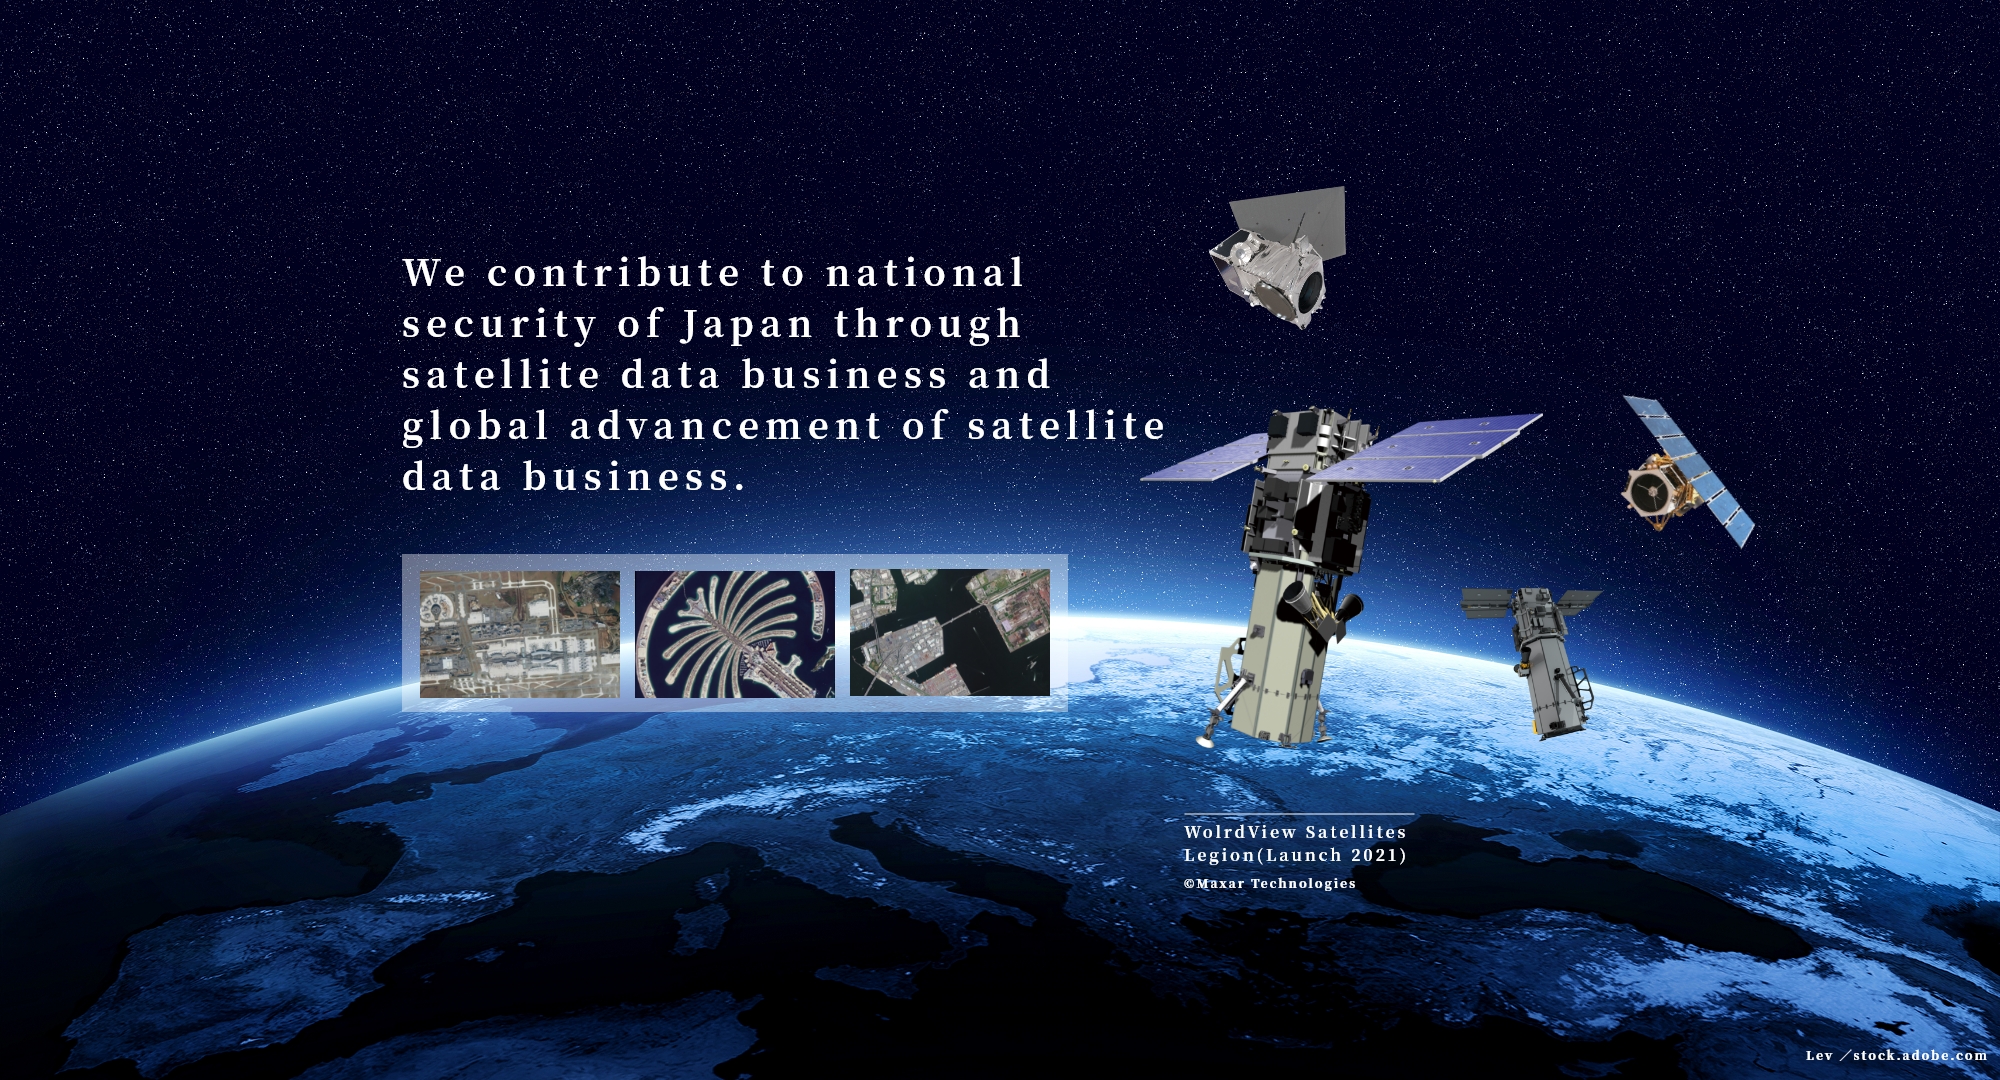 We contribute to national security of Japan through satellite data business and global advancement of satellite data business.